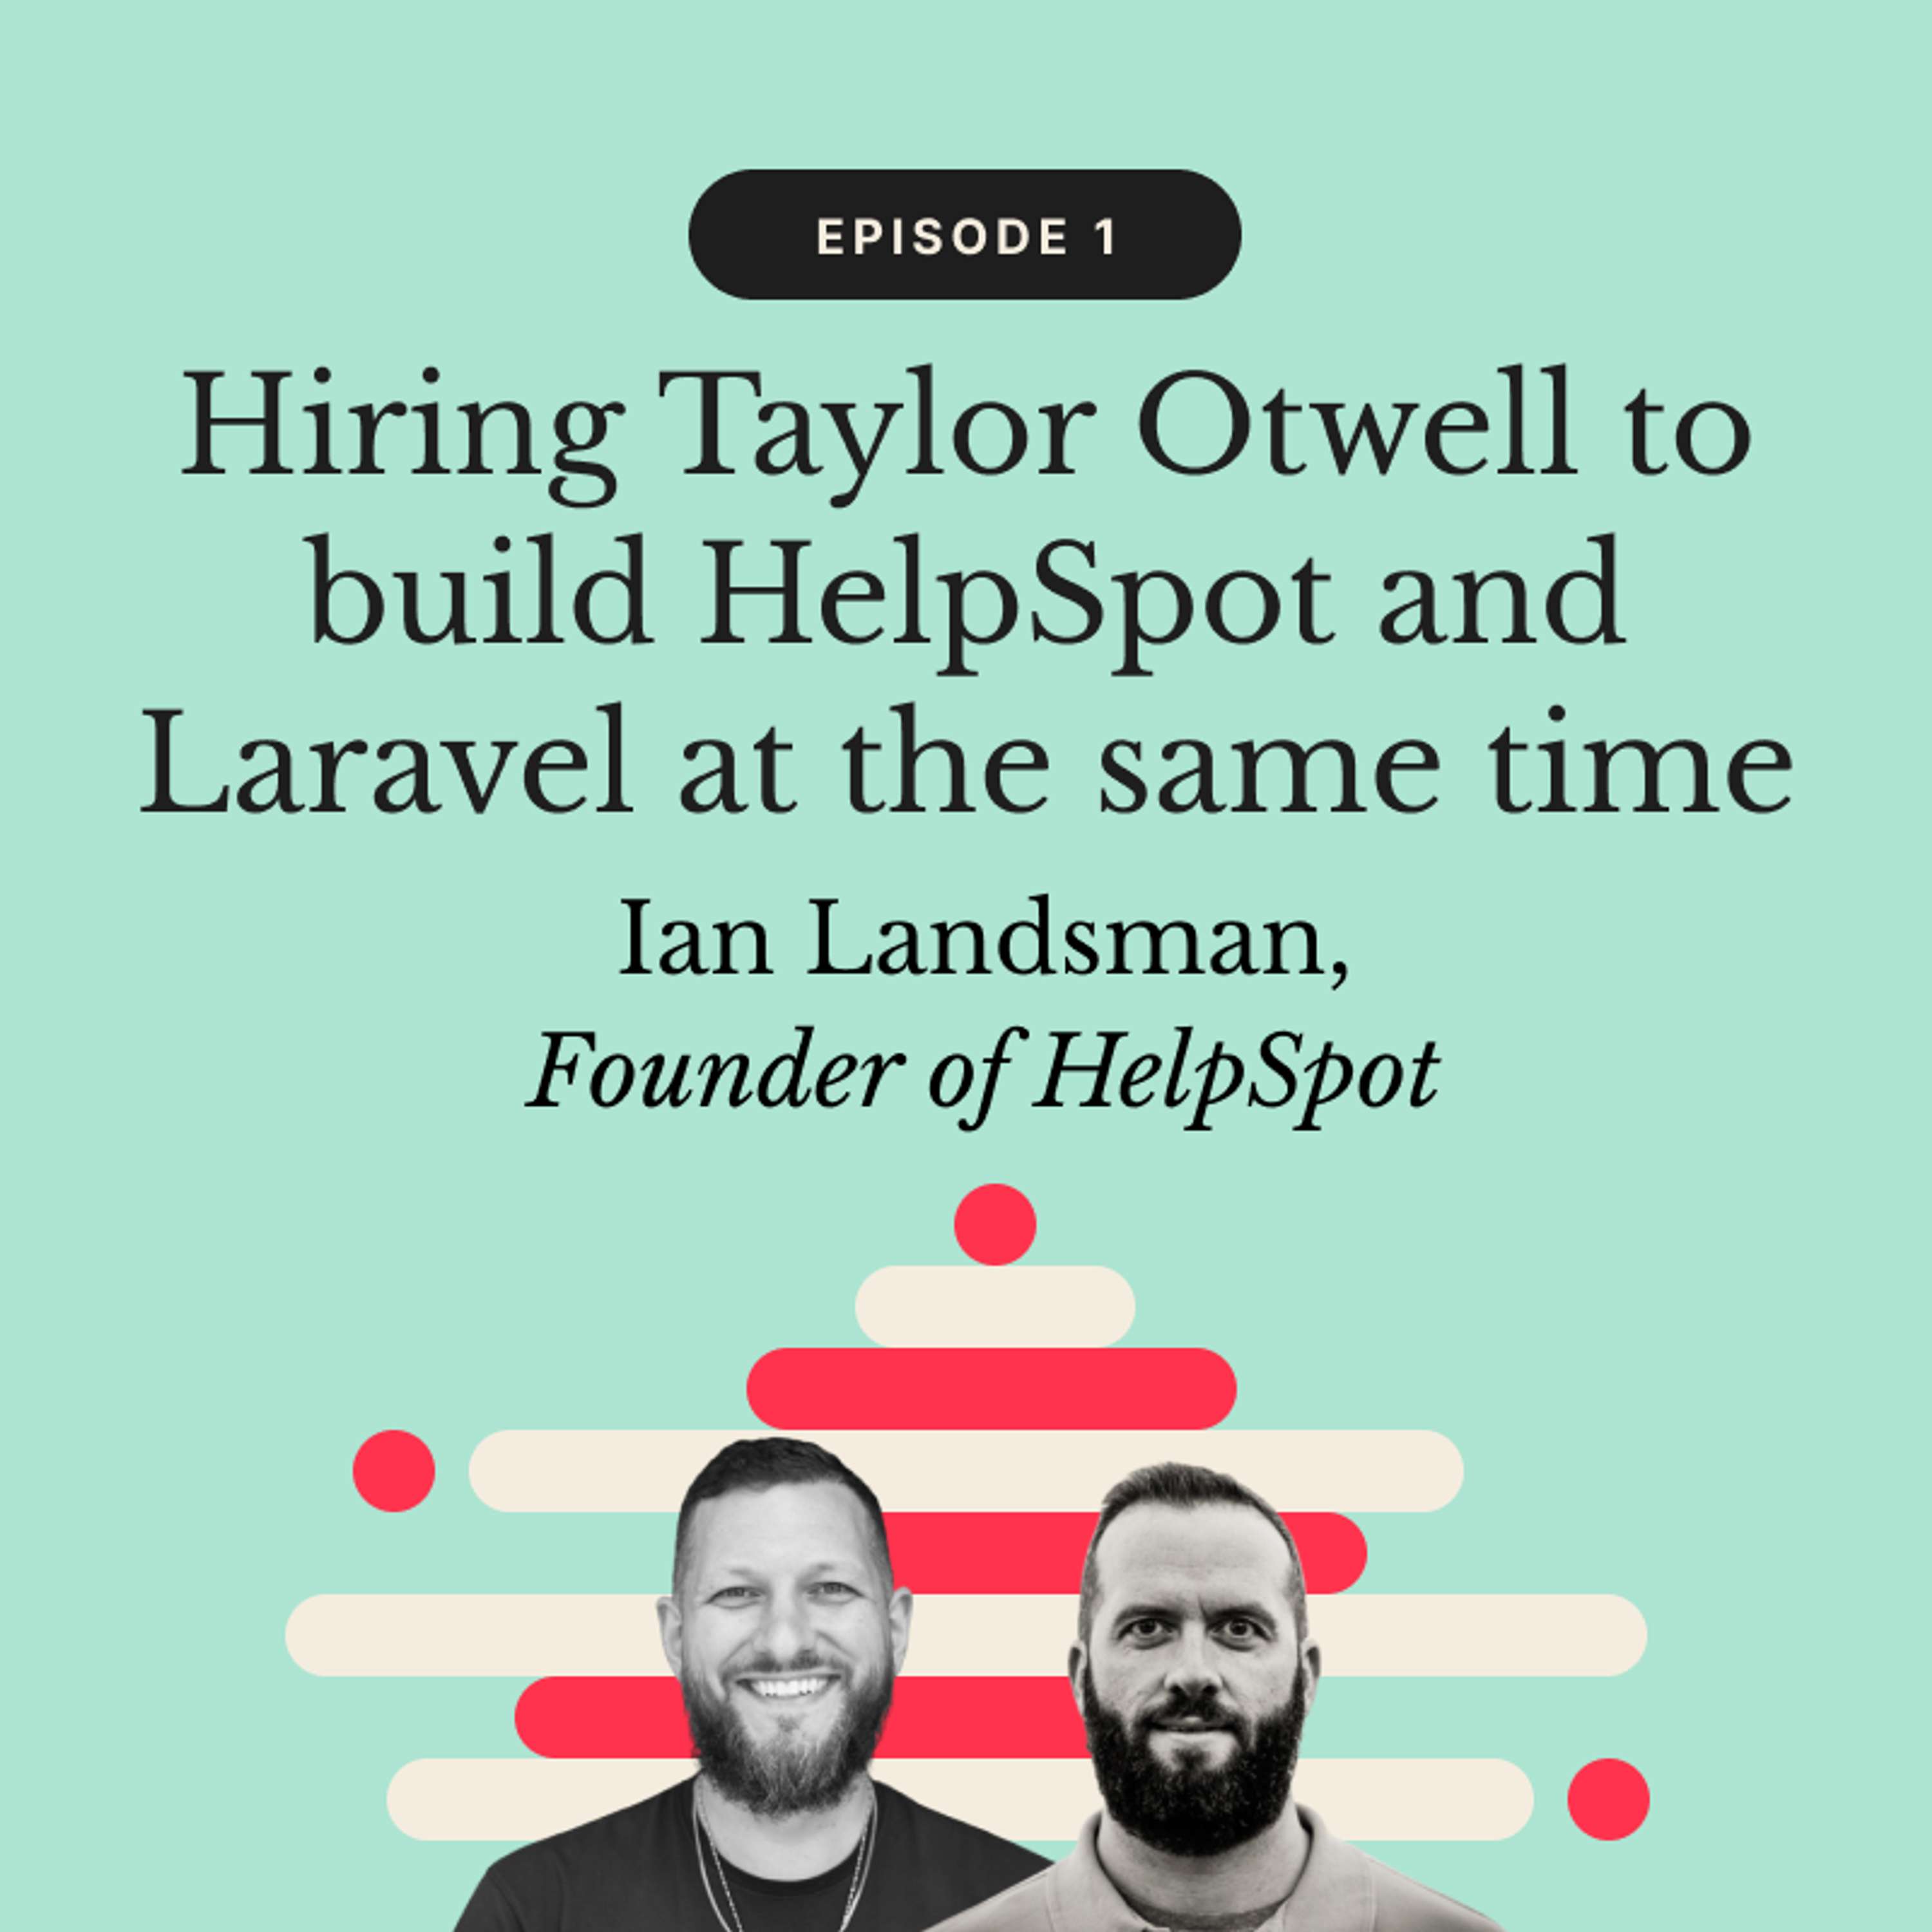 Hiring Taylor Otwell to build HelpSpot and Laravel at the same time | Ian Landsman, Founder of HelpSpot